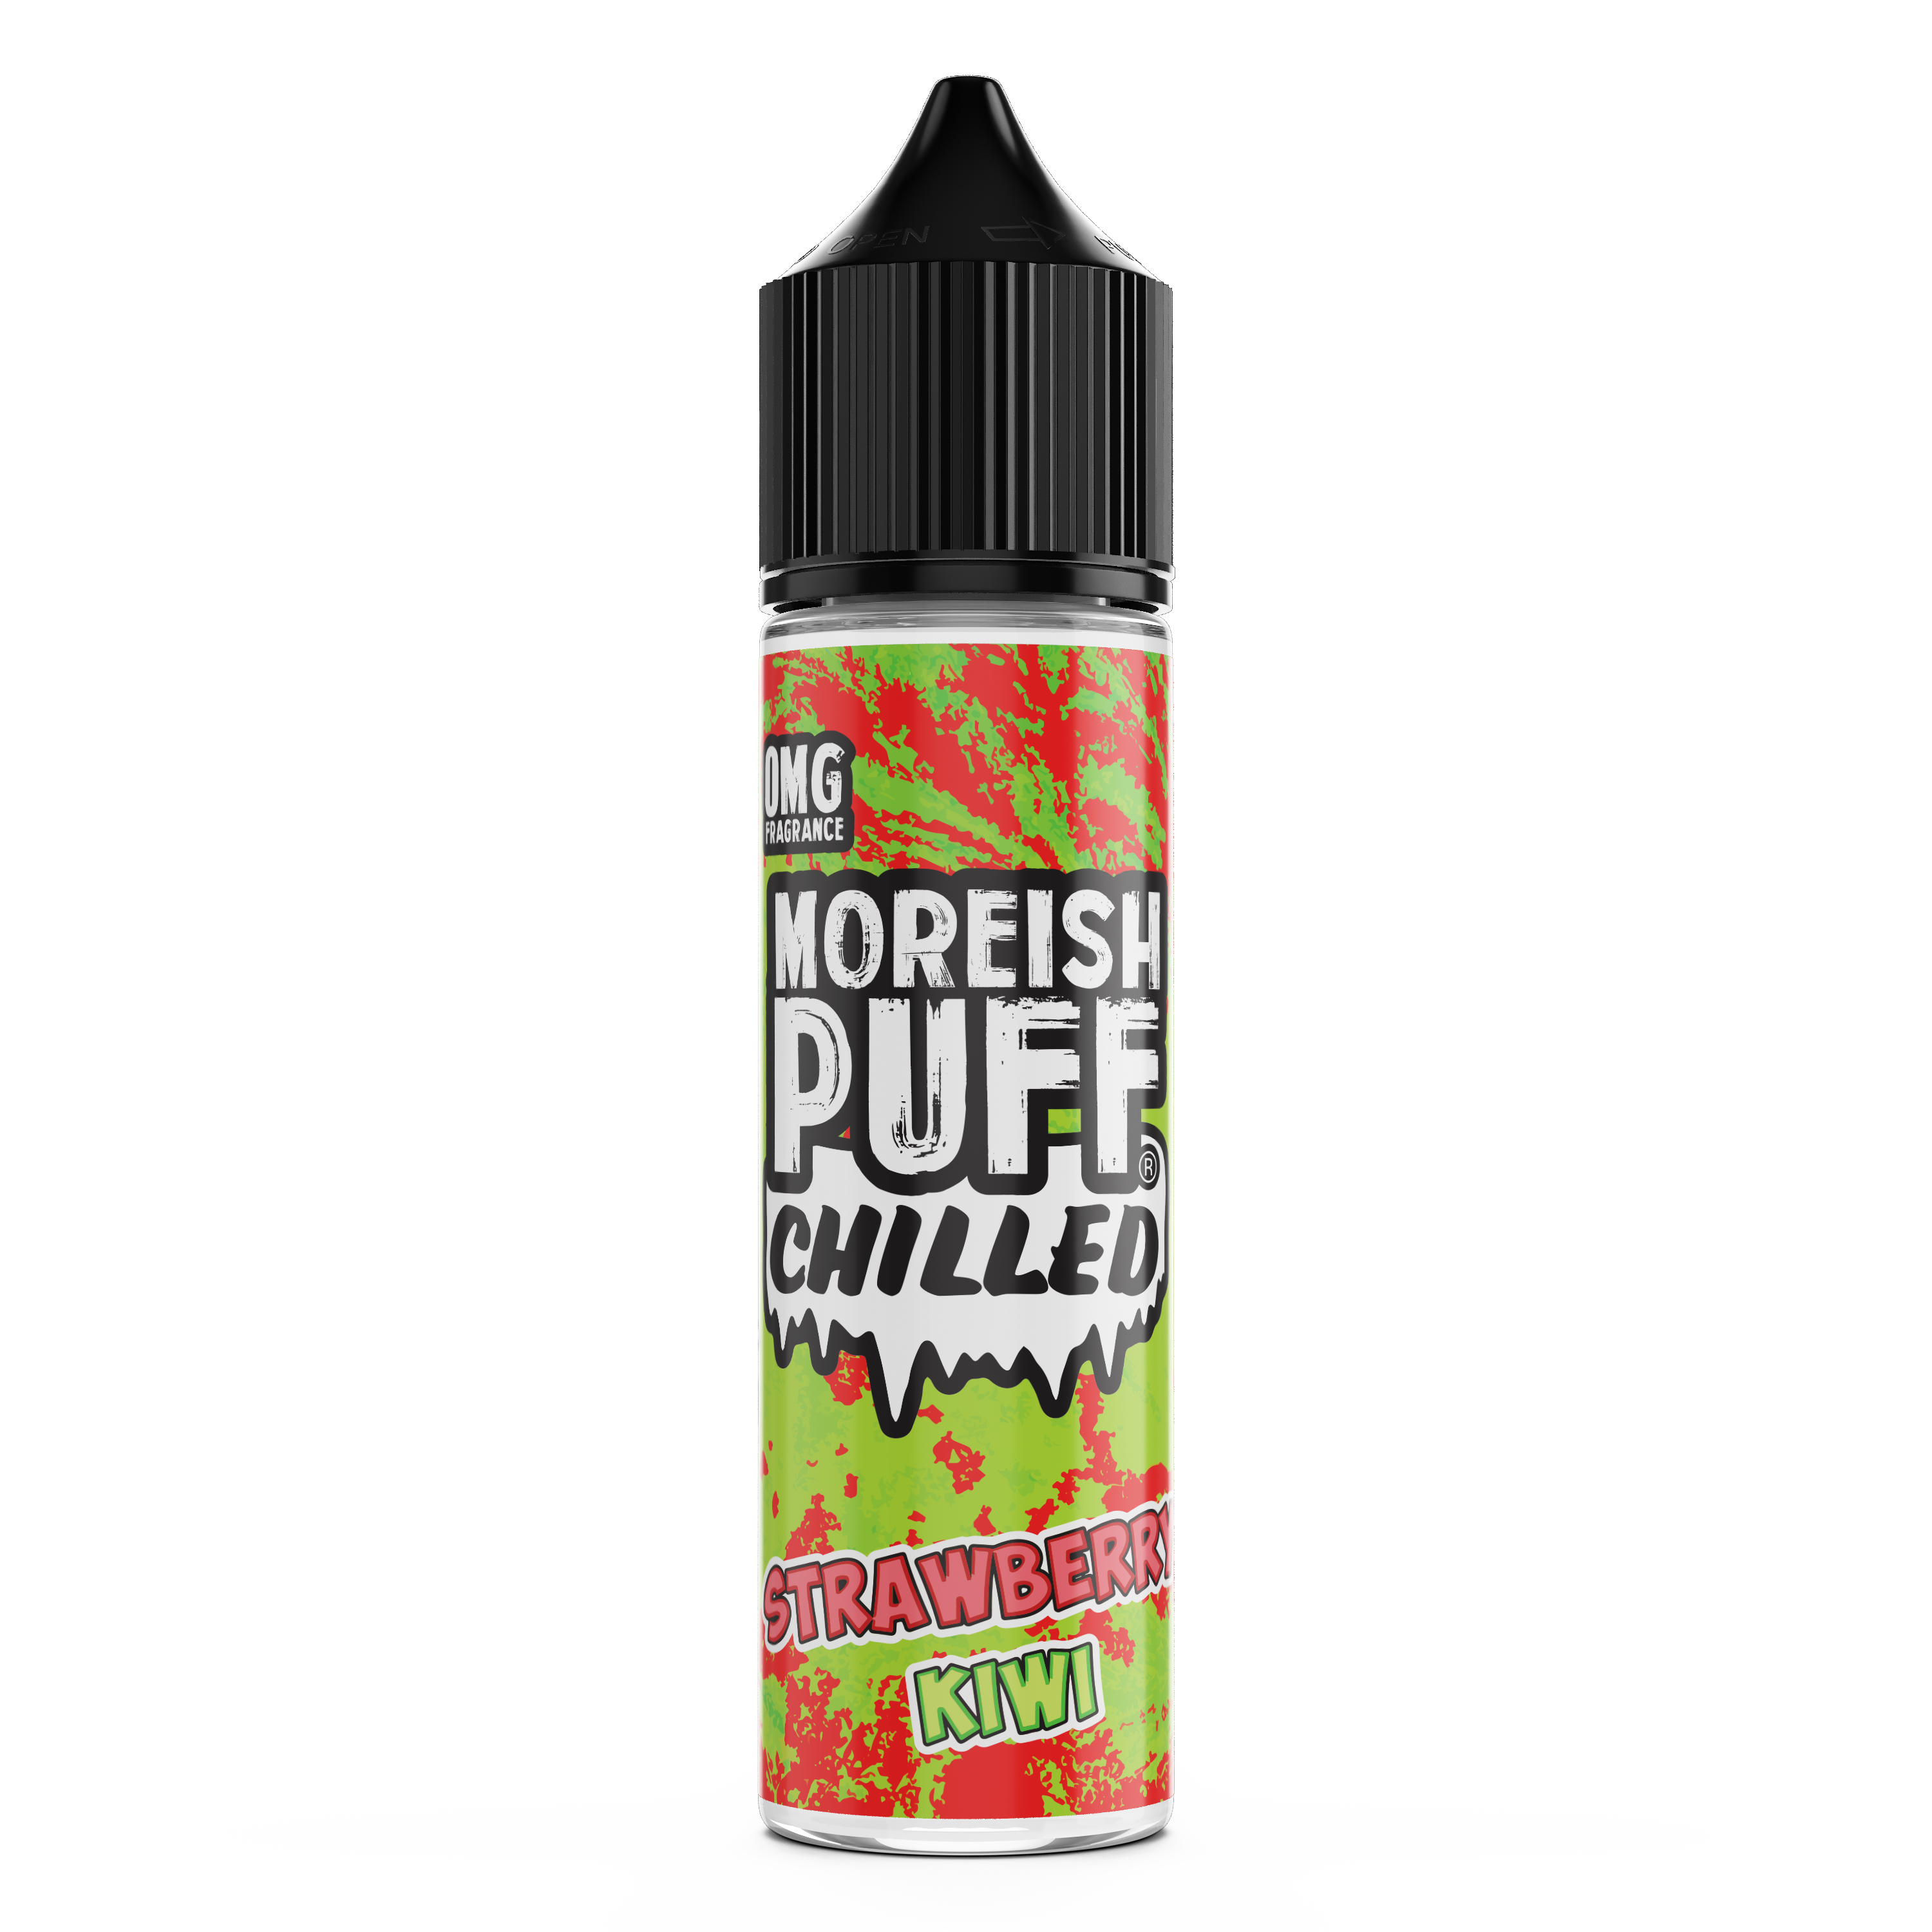 Strawberry and Kiwi Chilled by Moreish Puff 50ml Shortfill